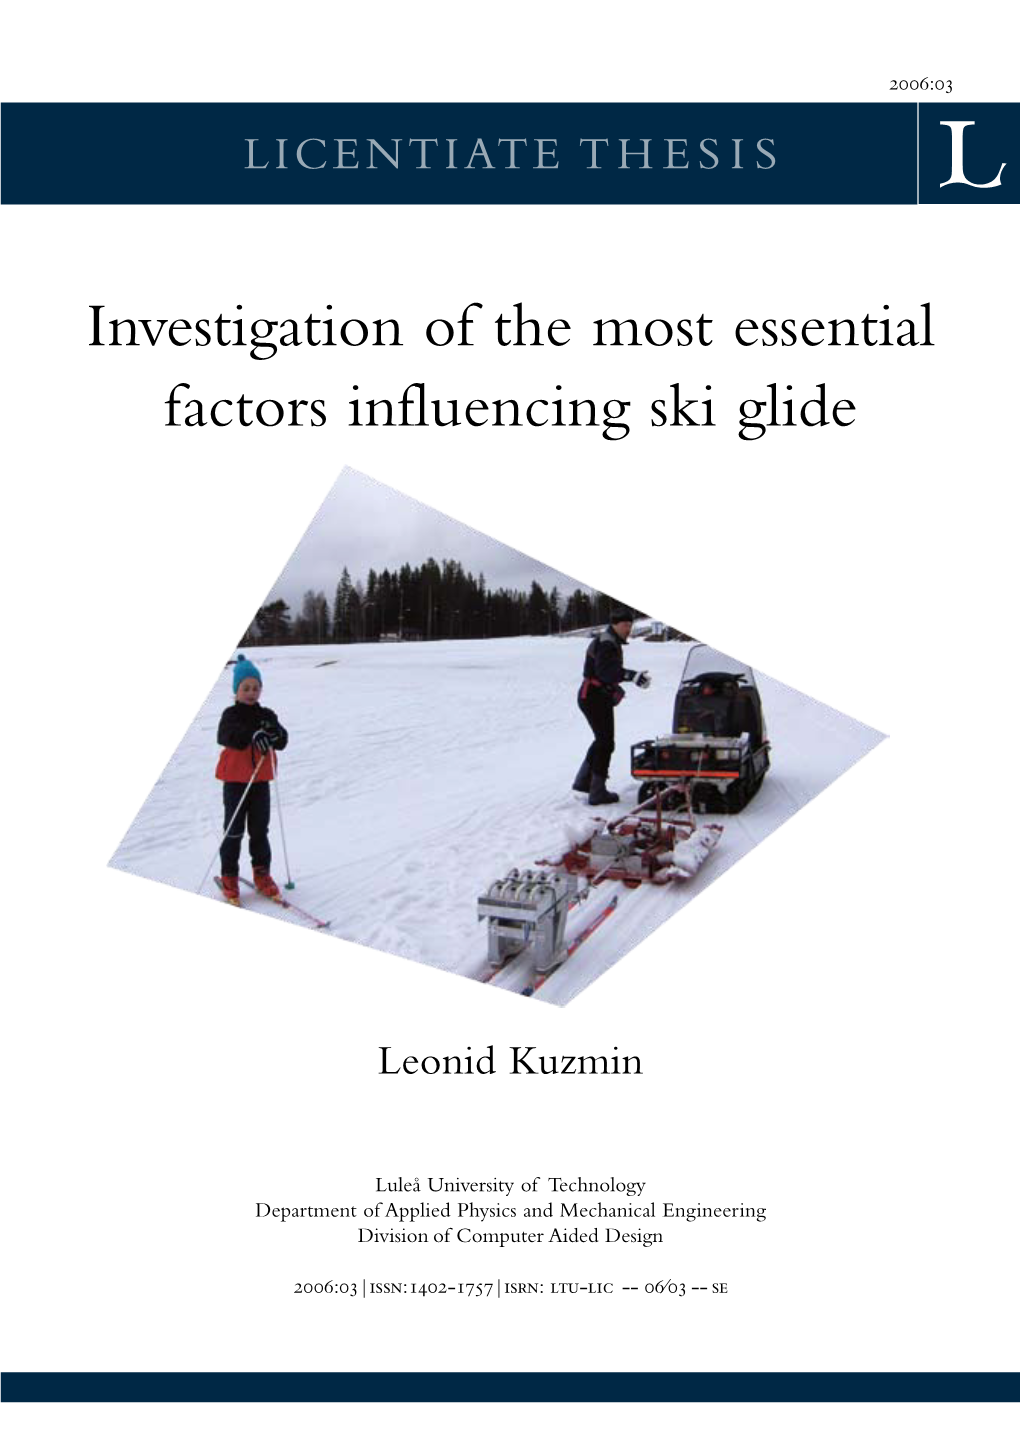 Investigation of the Most Essential Factors Influencing Ski Glide